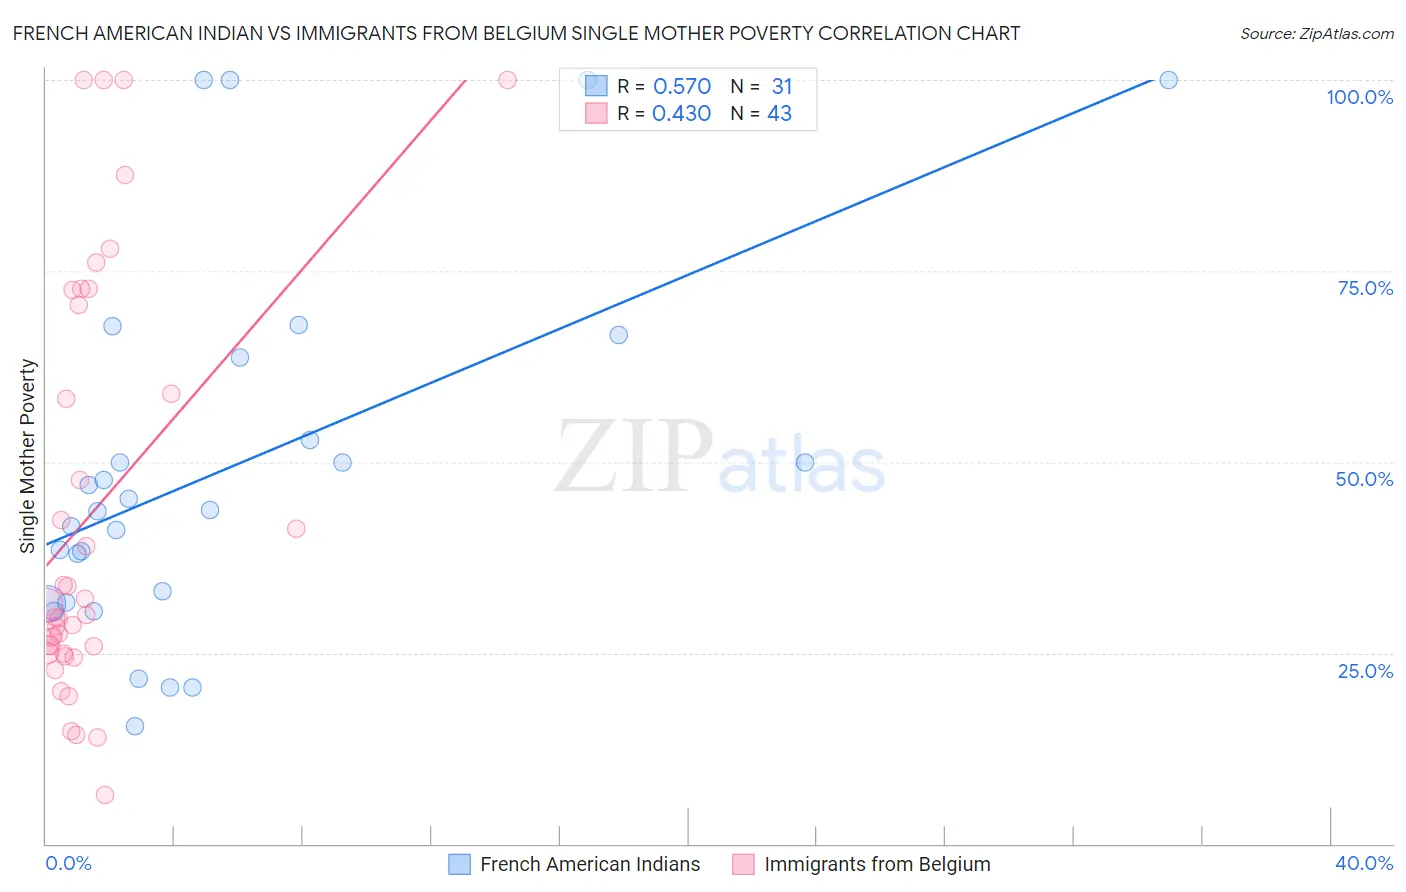 French American Indian vs Immigrants from Belgium Single Mother Poverty